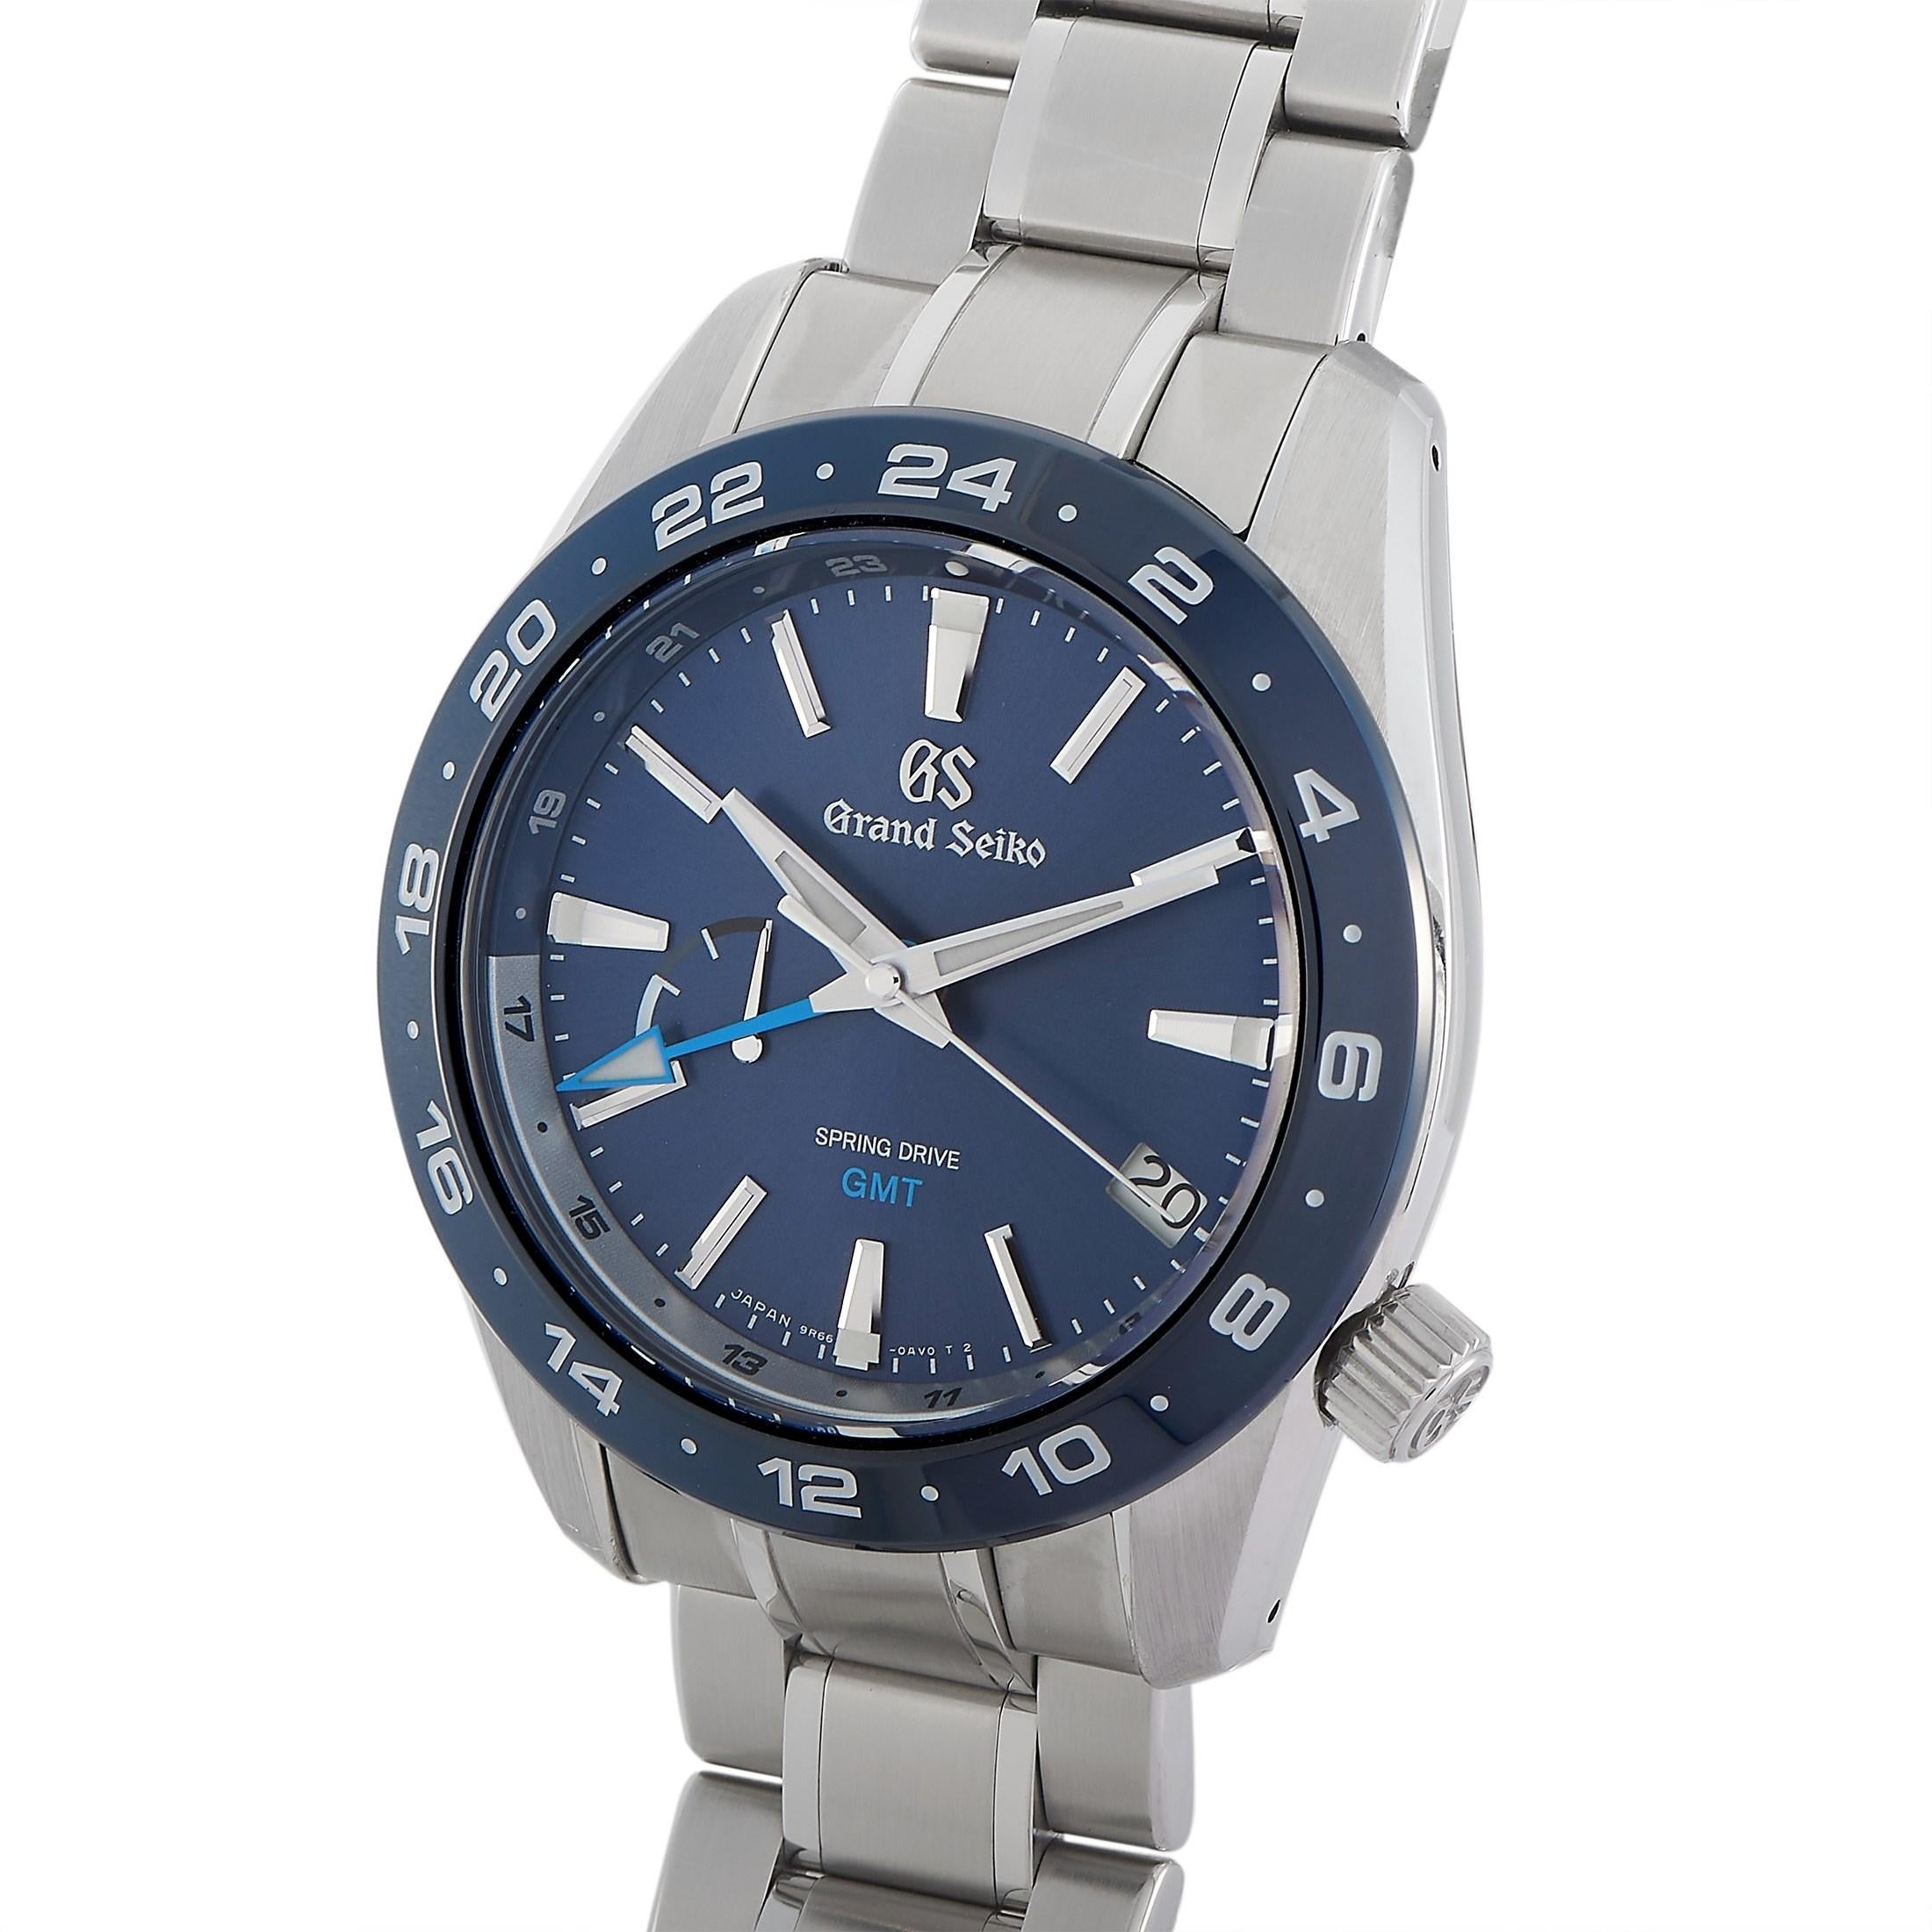 The Grand Seiko Sport Collection Spring Drive GMT Watch, reference number SBGE255, adds luxury to a classic design.

Sporty and stylish, this Grand Seiko features a 40.5mm case that is crafted from stainless steel. The blue ceramic bezel - which